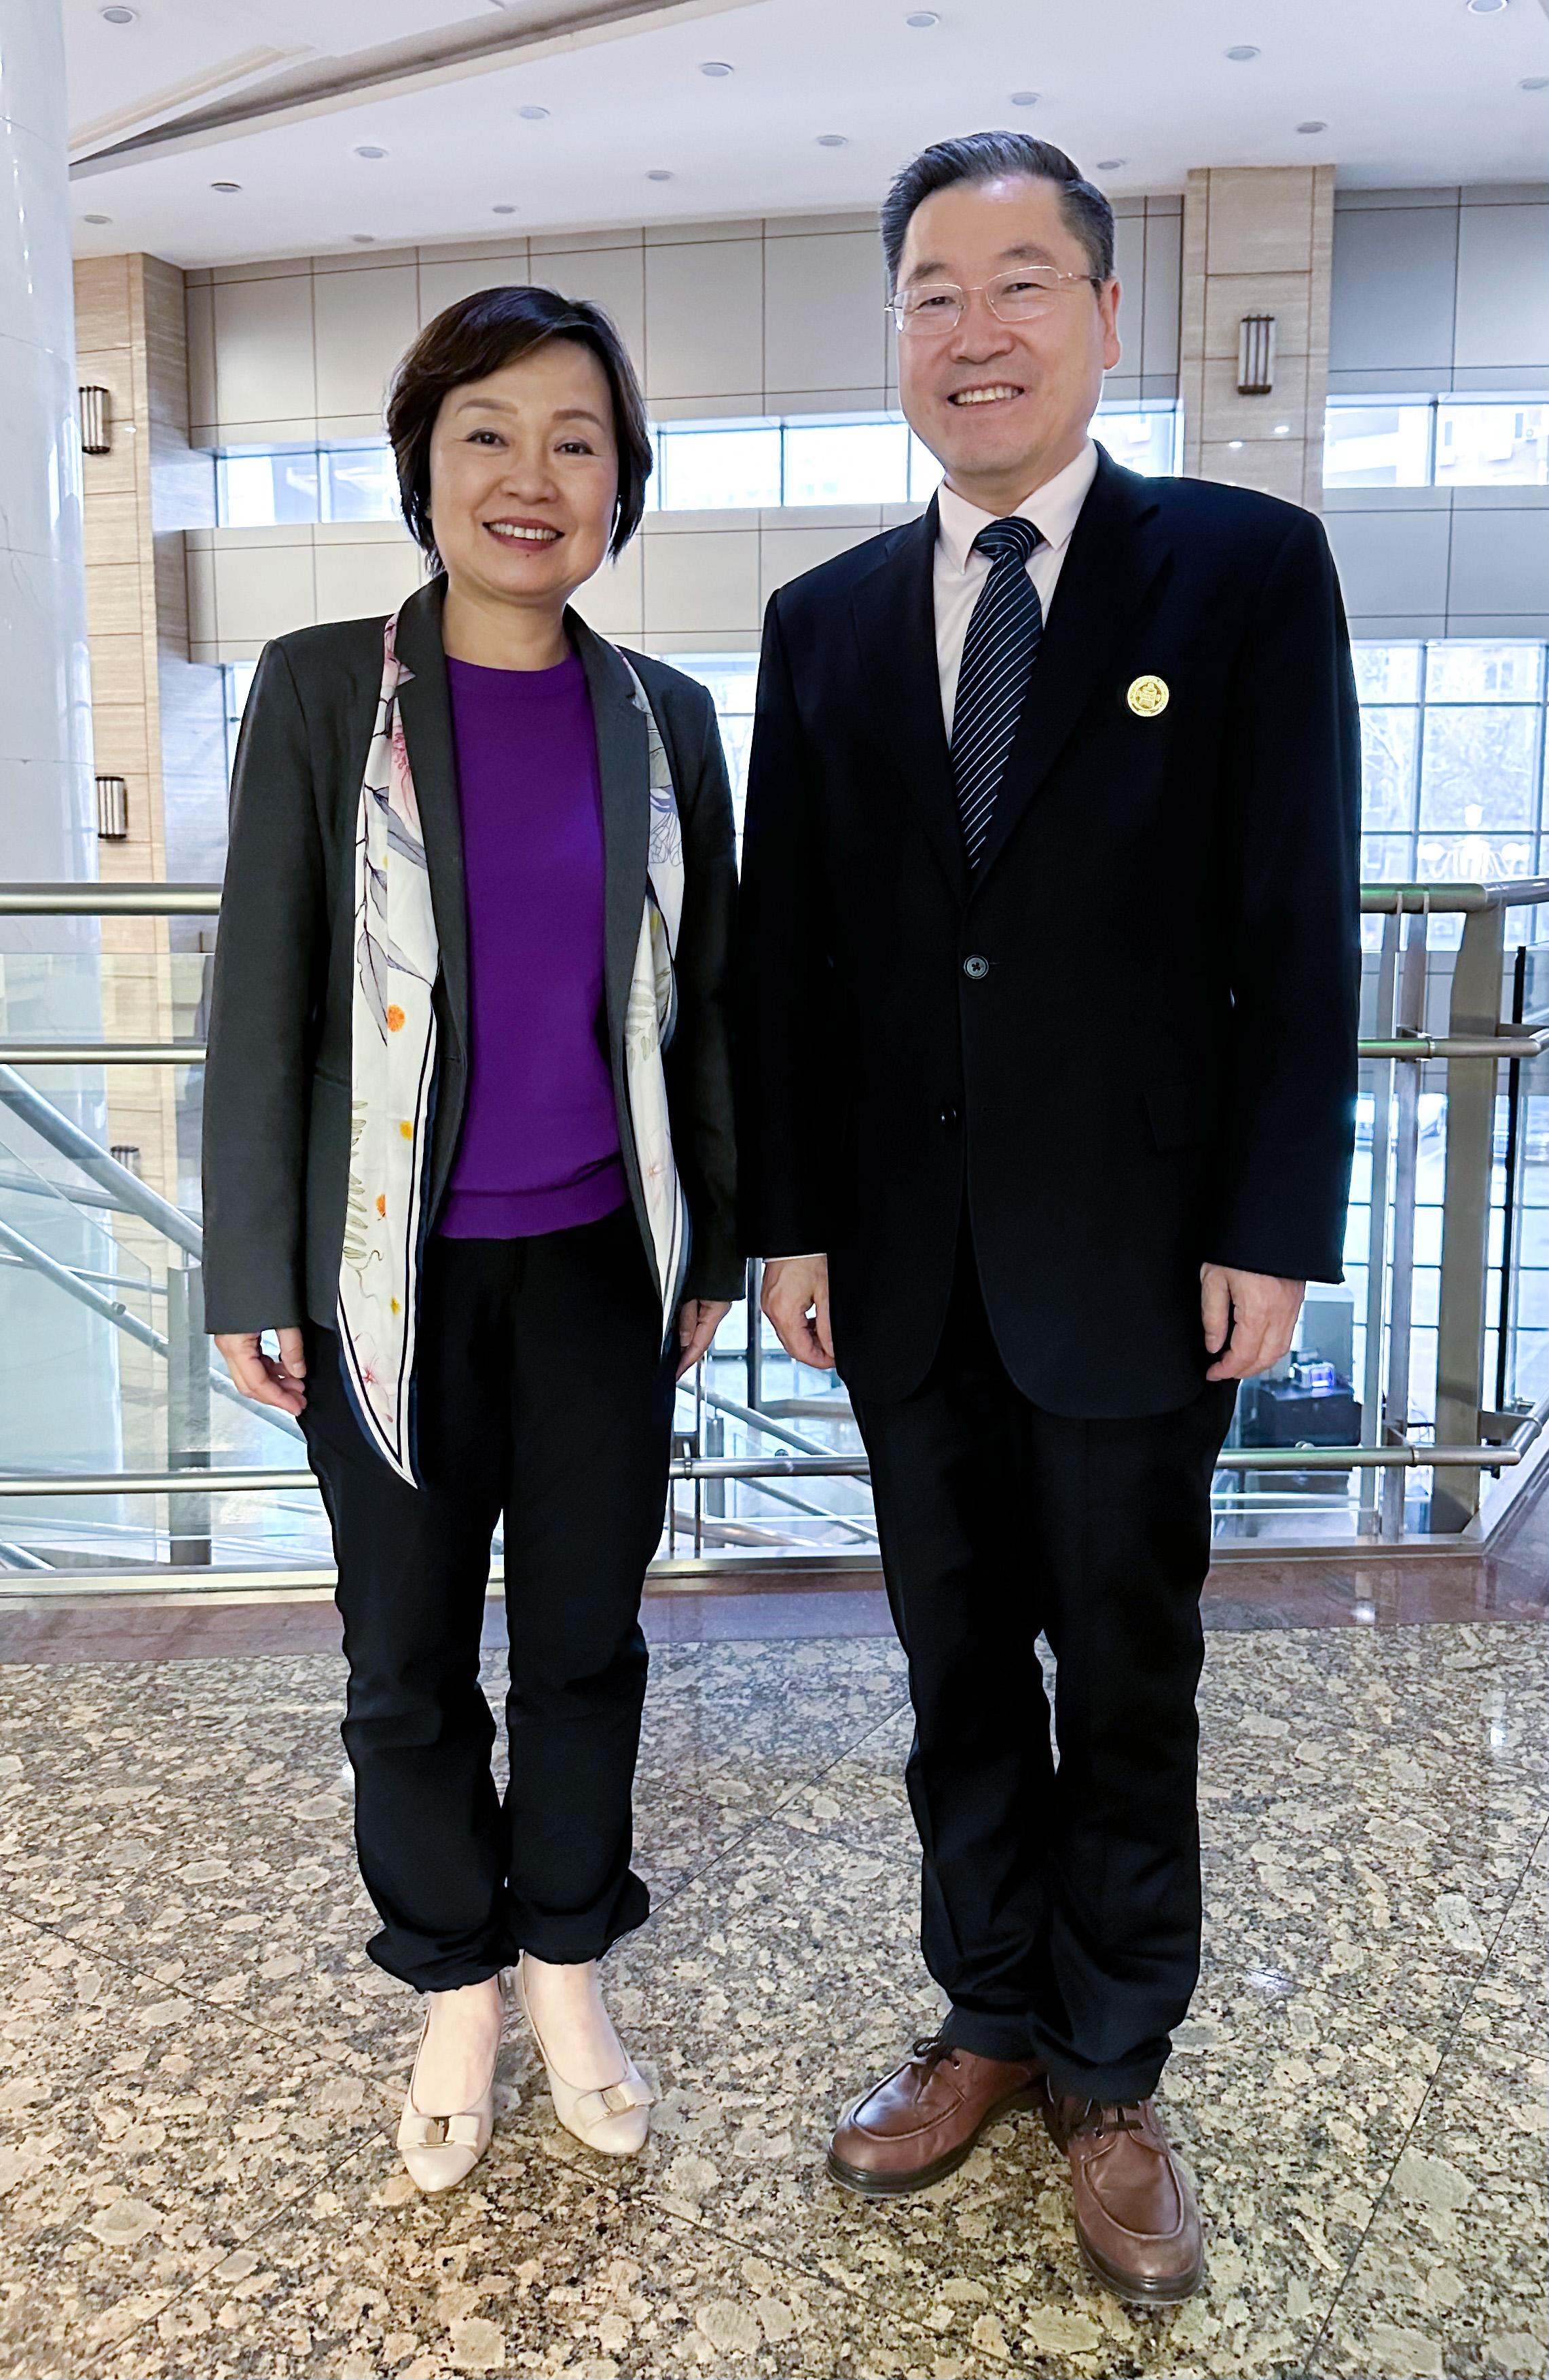 The Secretary for Education, Dr Choi Yuk-lin (left), meets the Vice President of Beijing Normal University, Professor Zhou Zuoyu (right), in Beijing today (March 29).